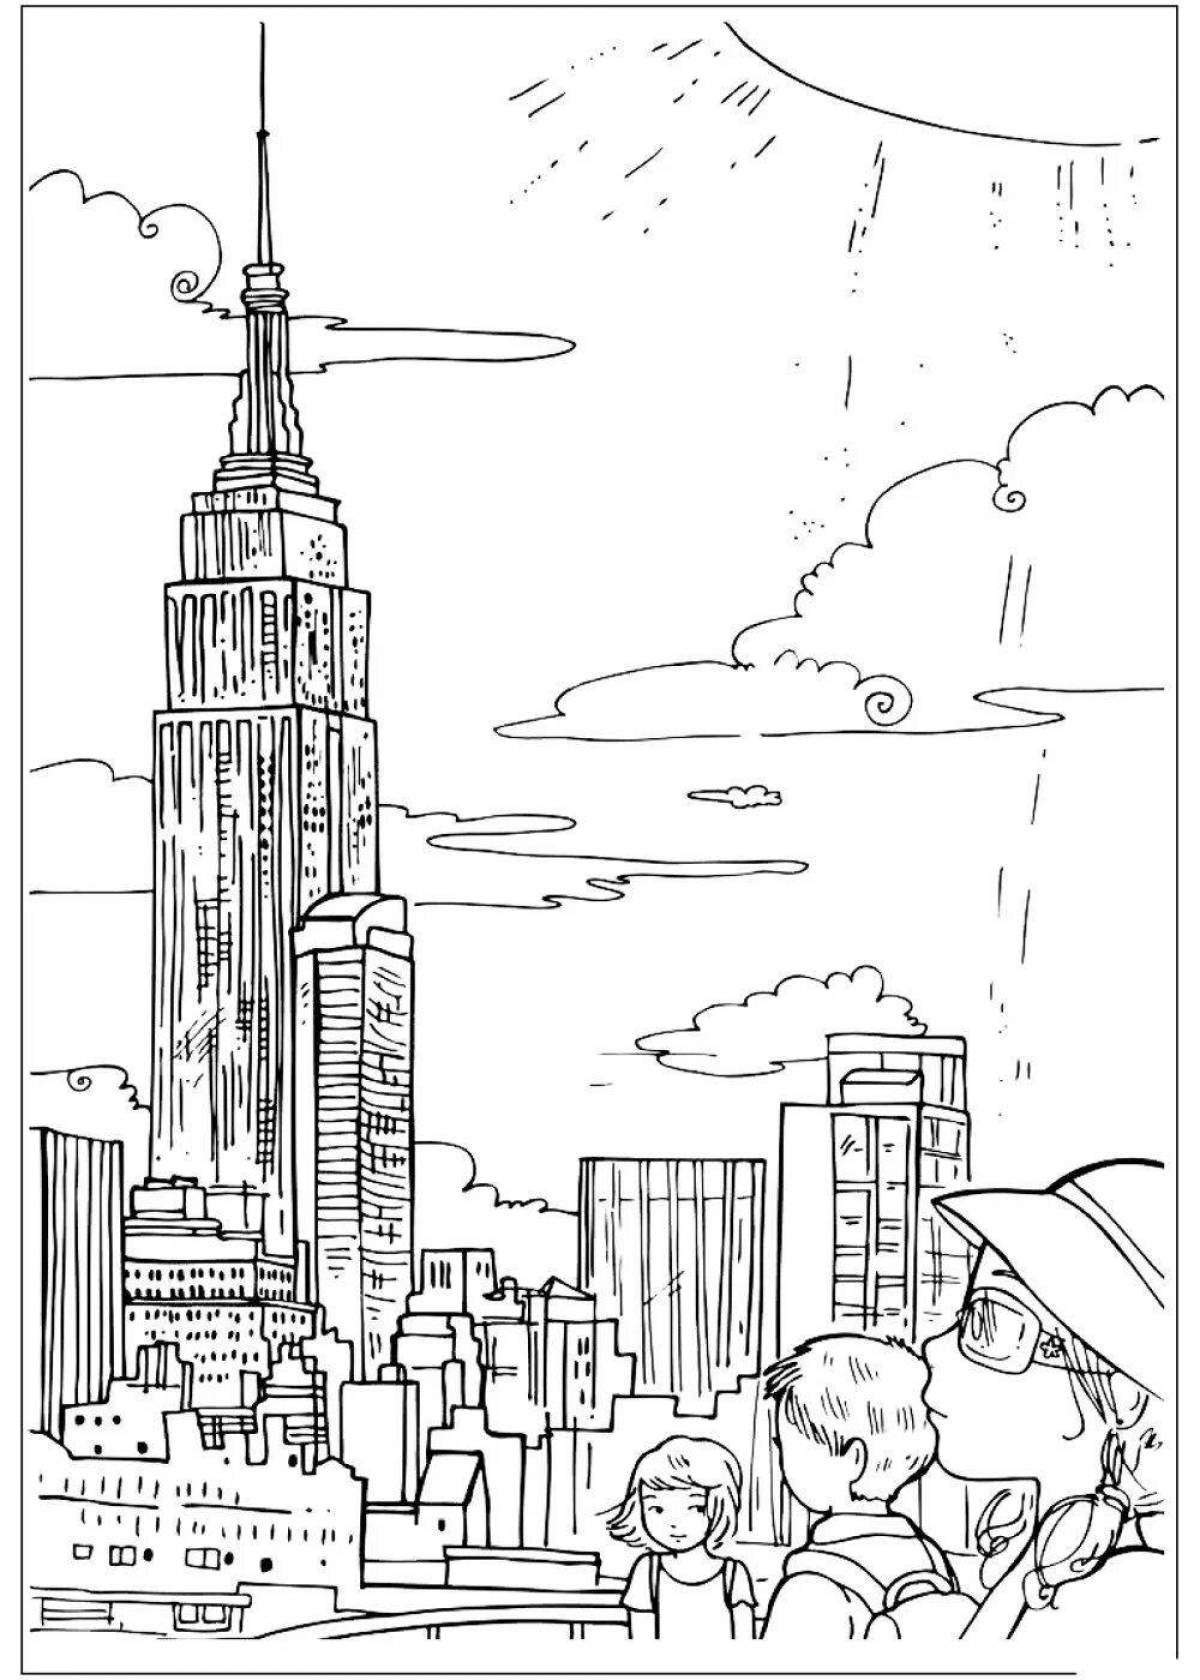 Delightful new york coloring book